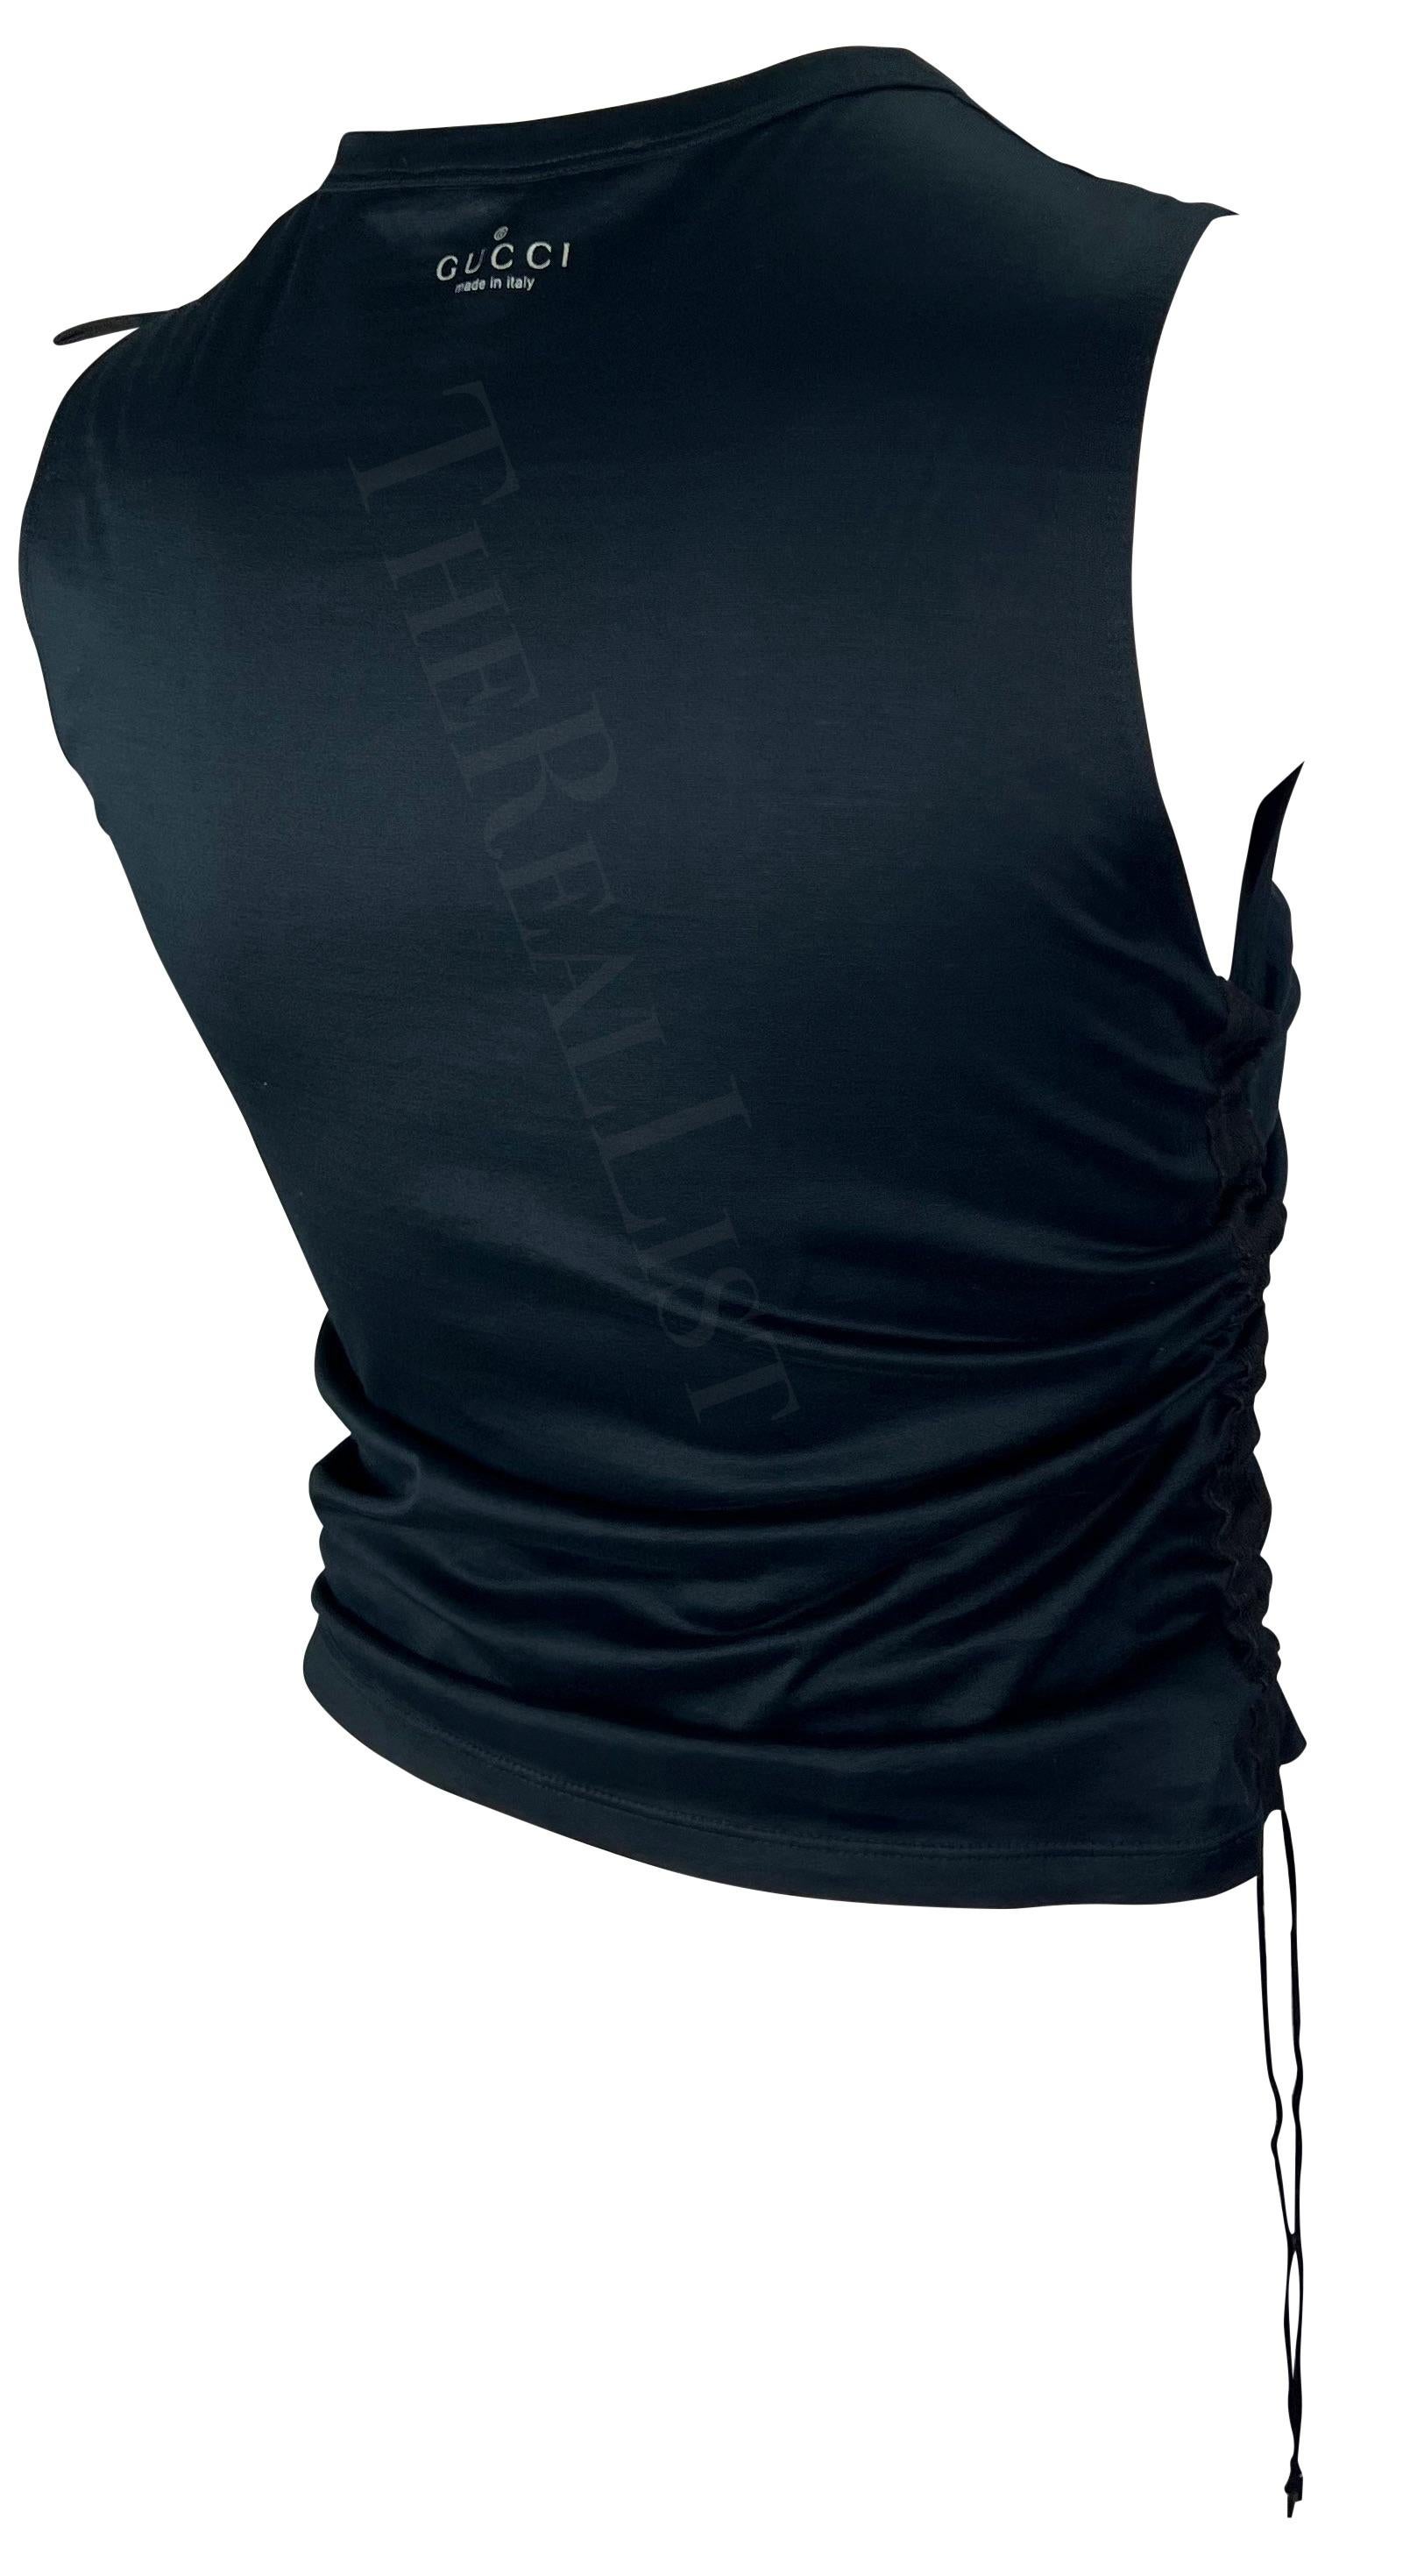 Women's S/S 2001 Gucci by Tom Ford Black Sleeveless Drawstring Top For Sale